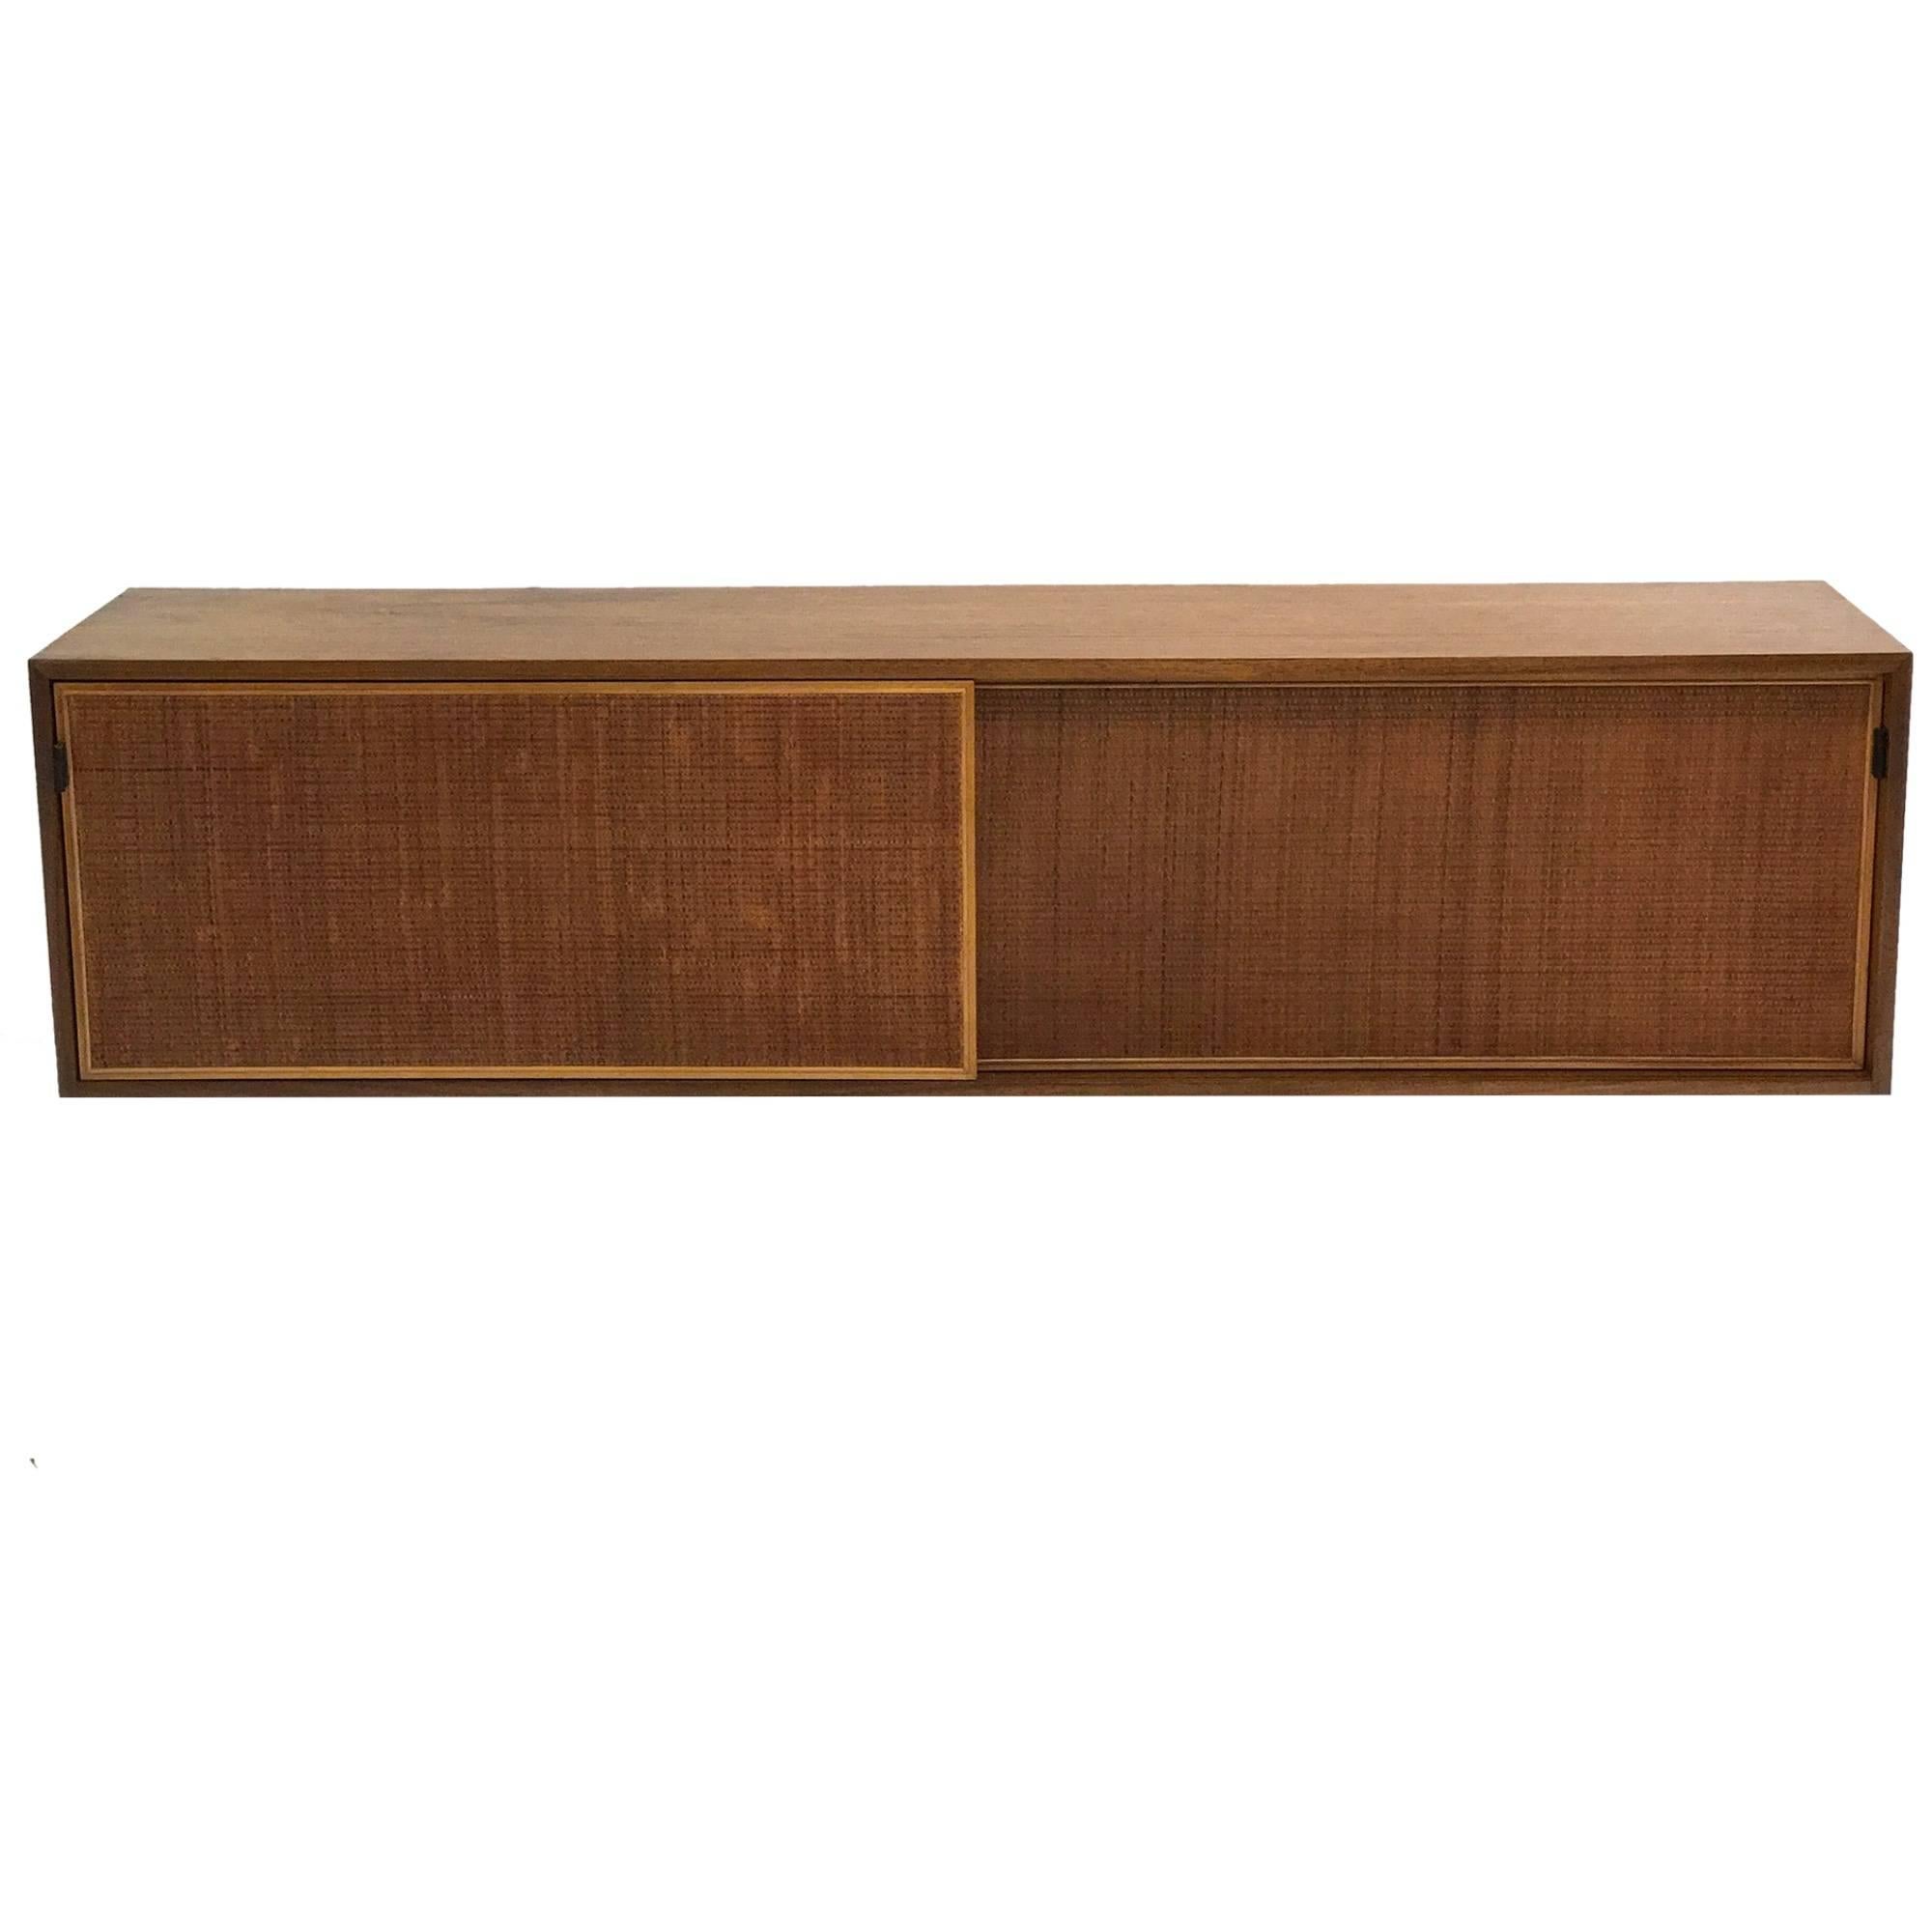 Florence Knoll Wall Hanging Credenza in Walnut with Cane Doors and Oak Shelves